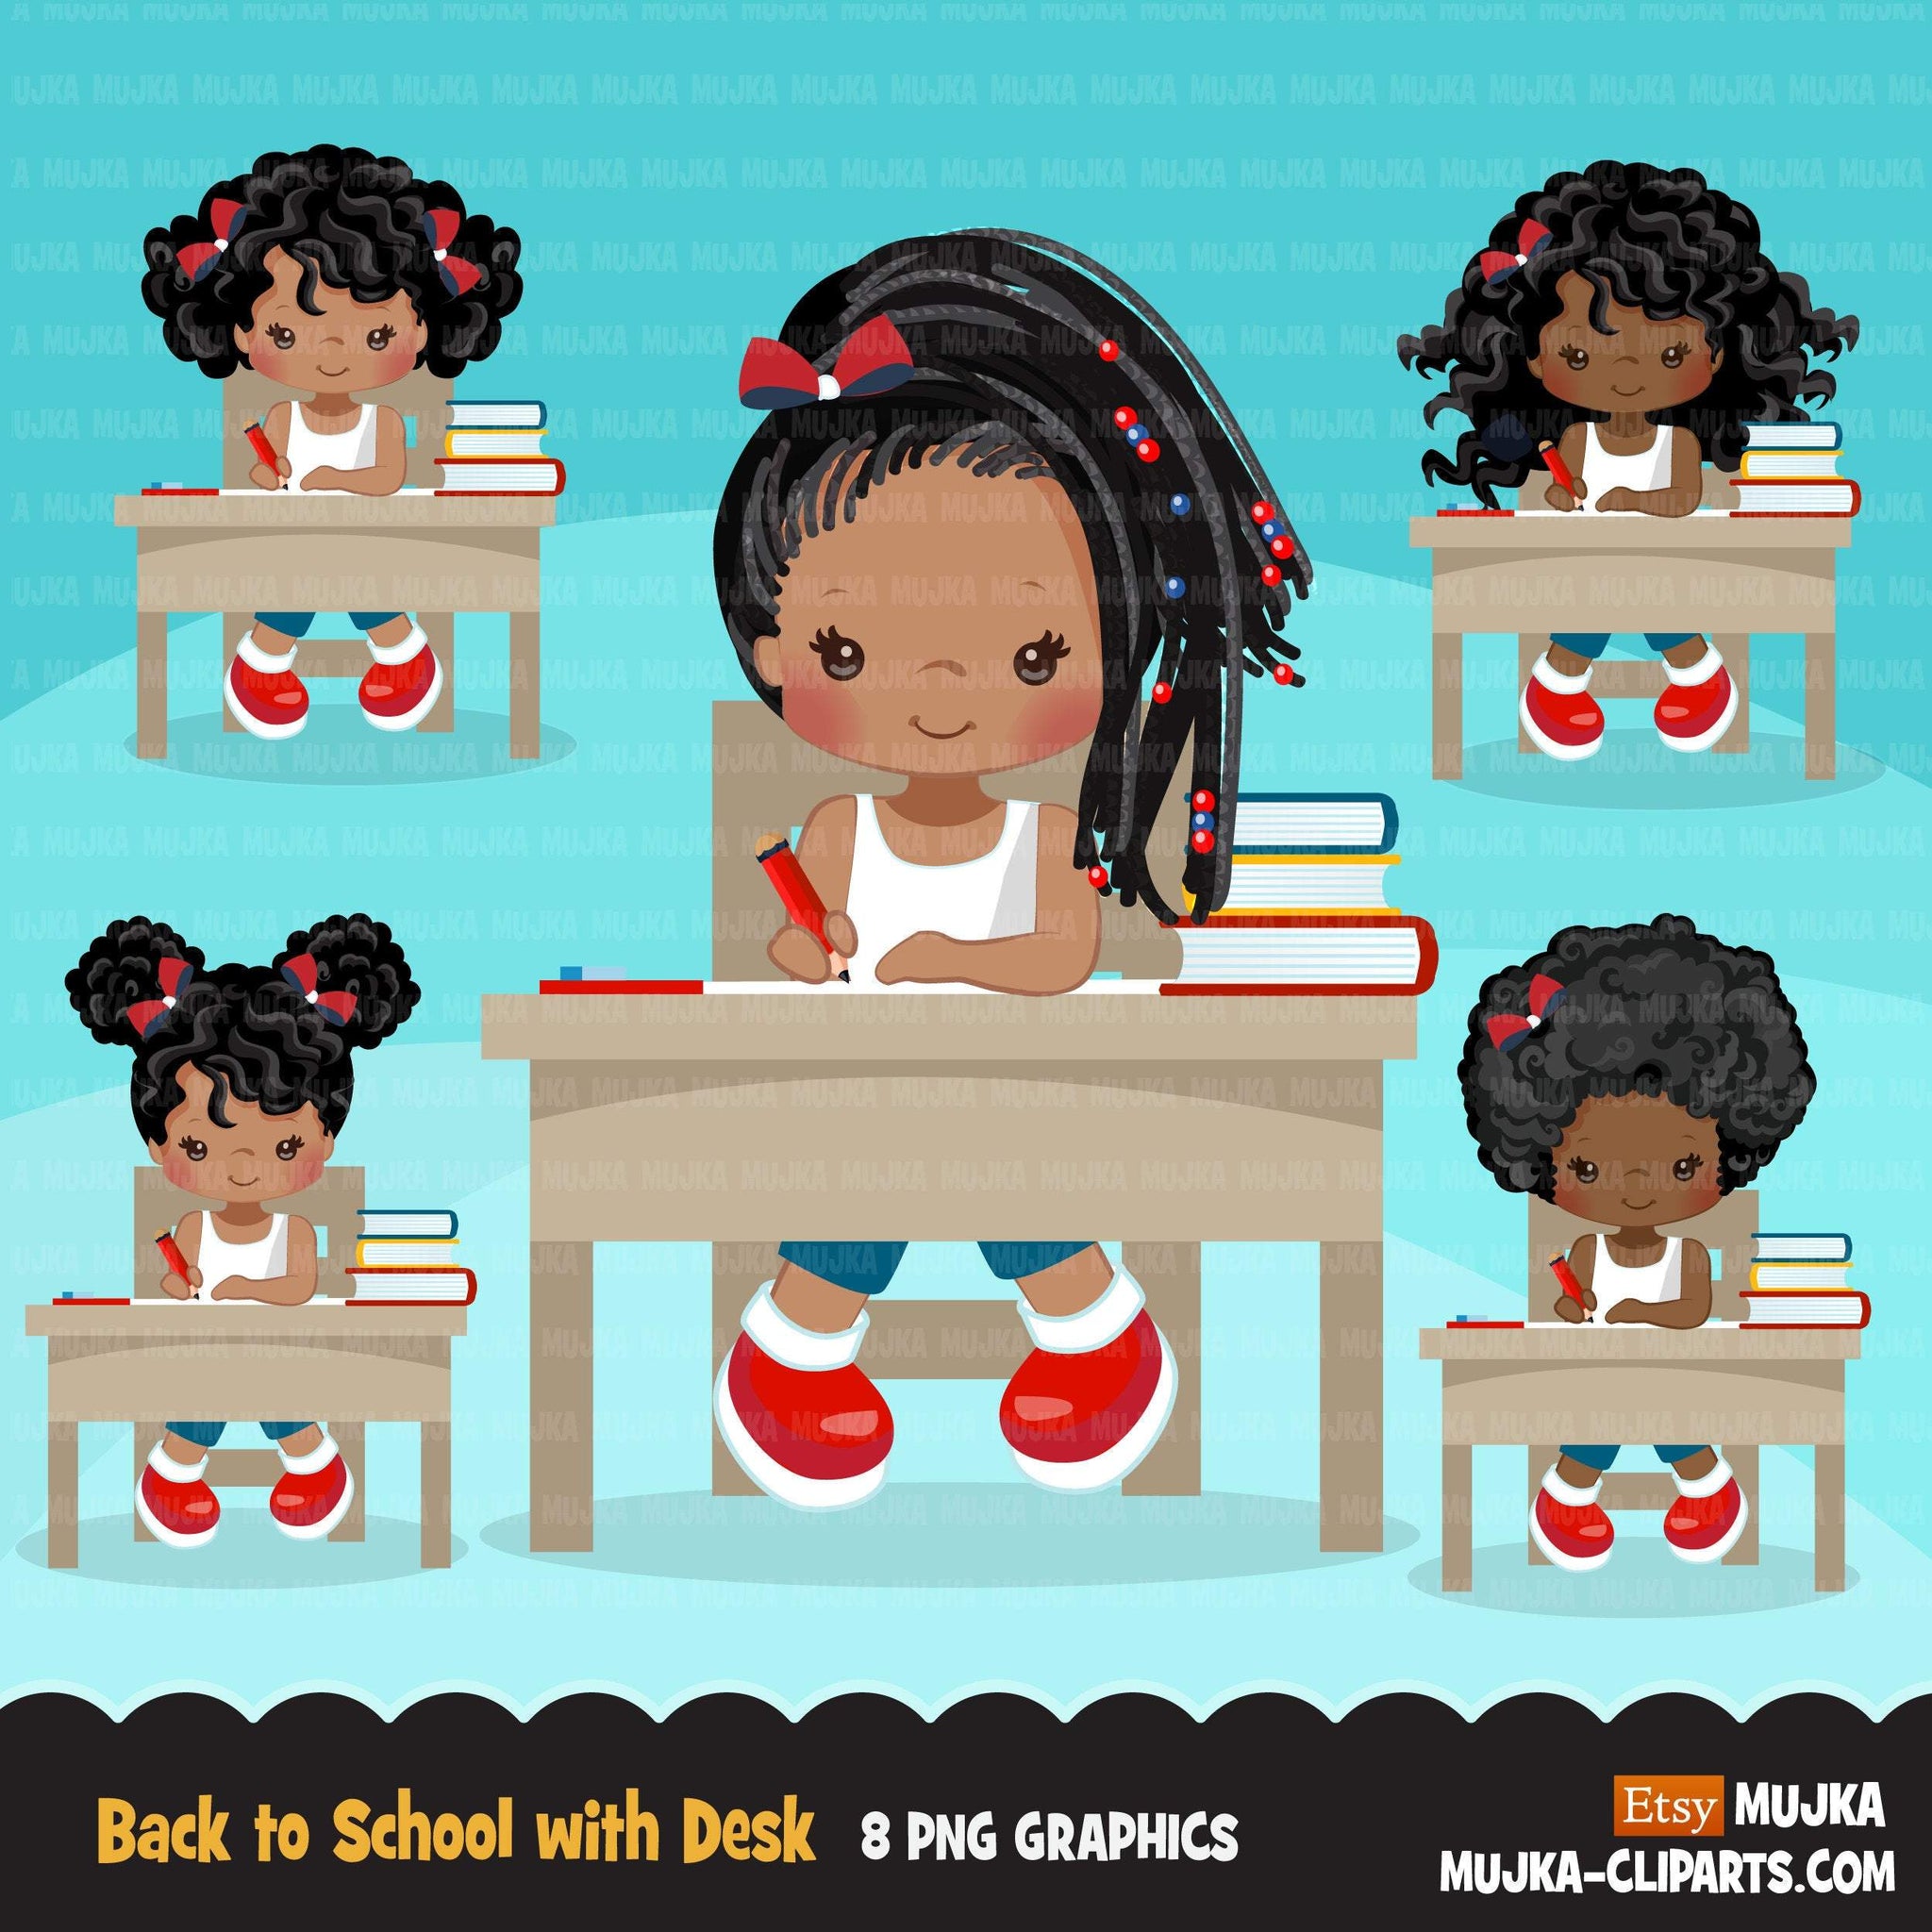 Back to school clipart with black Girl students sitting on a desk